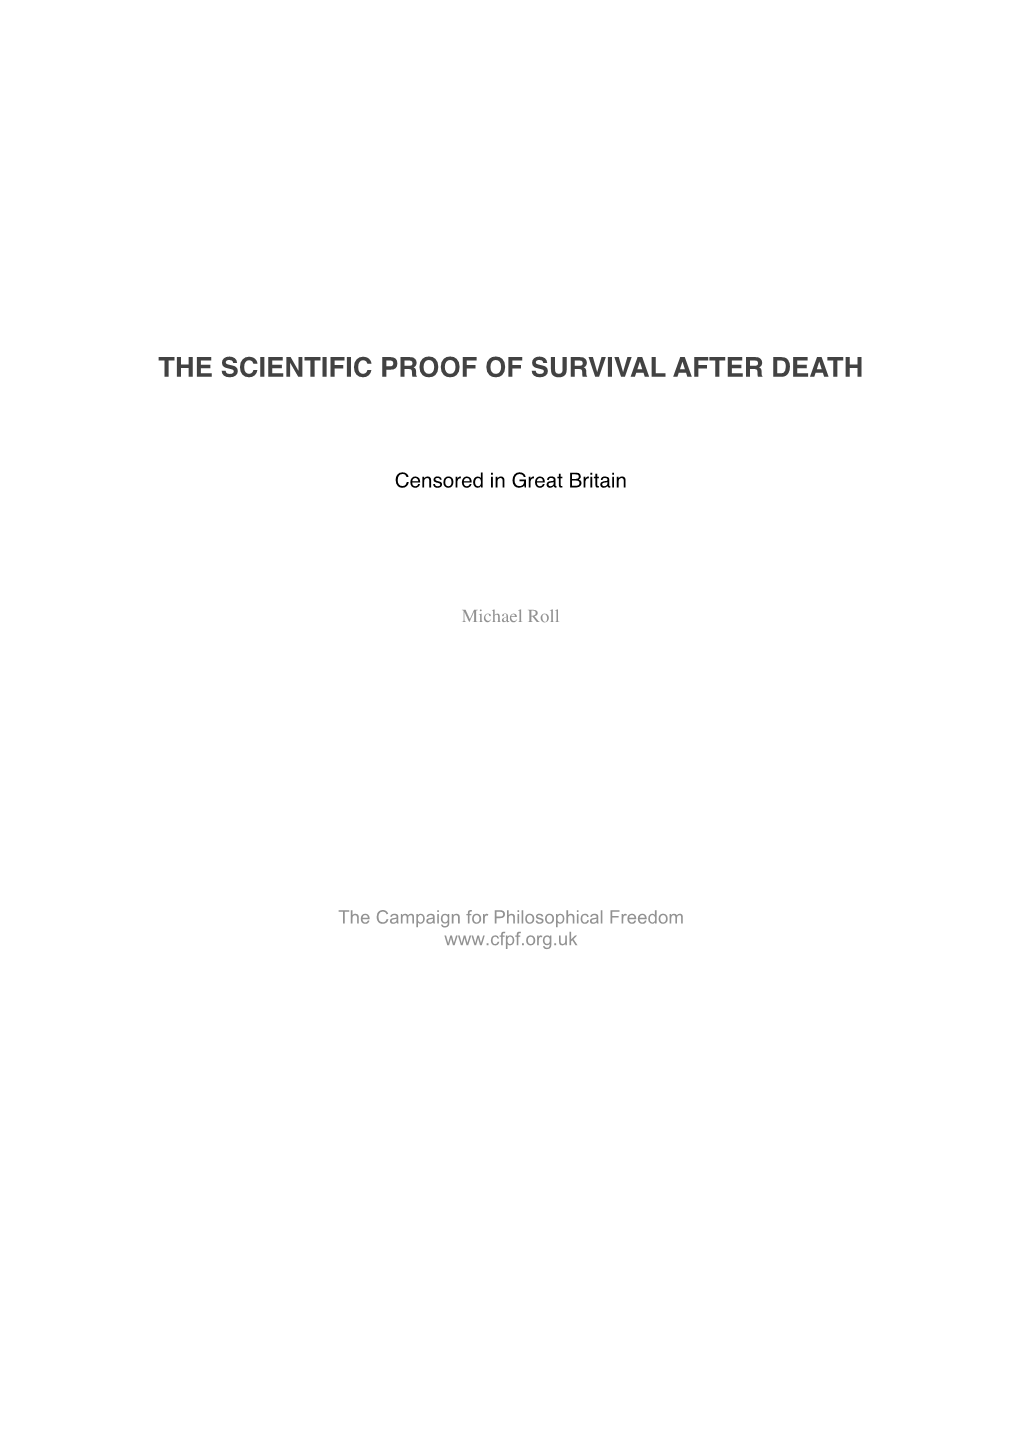 The Scientific Proof of Survival After Death